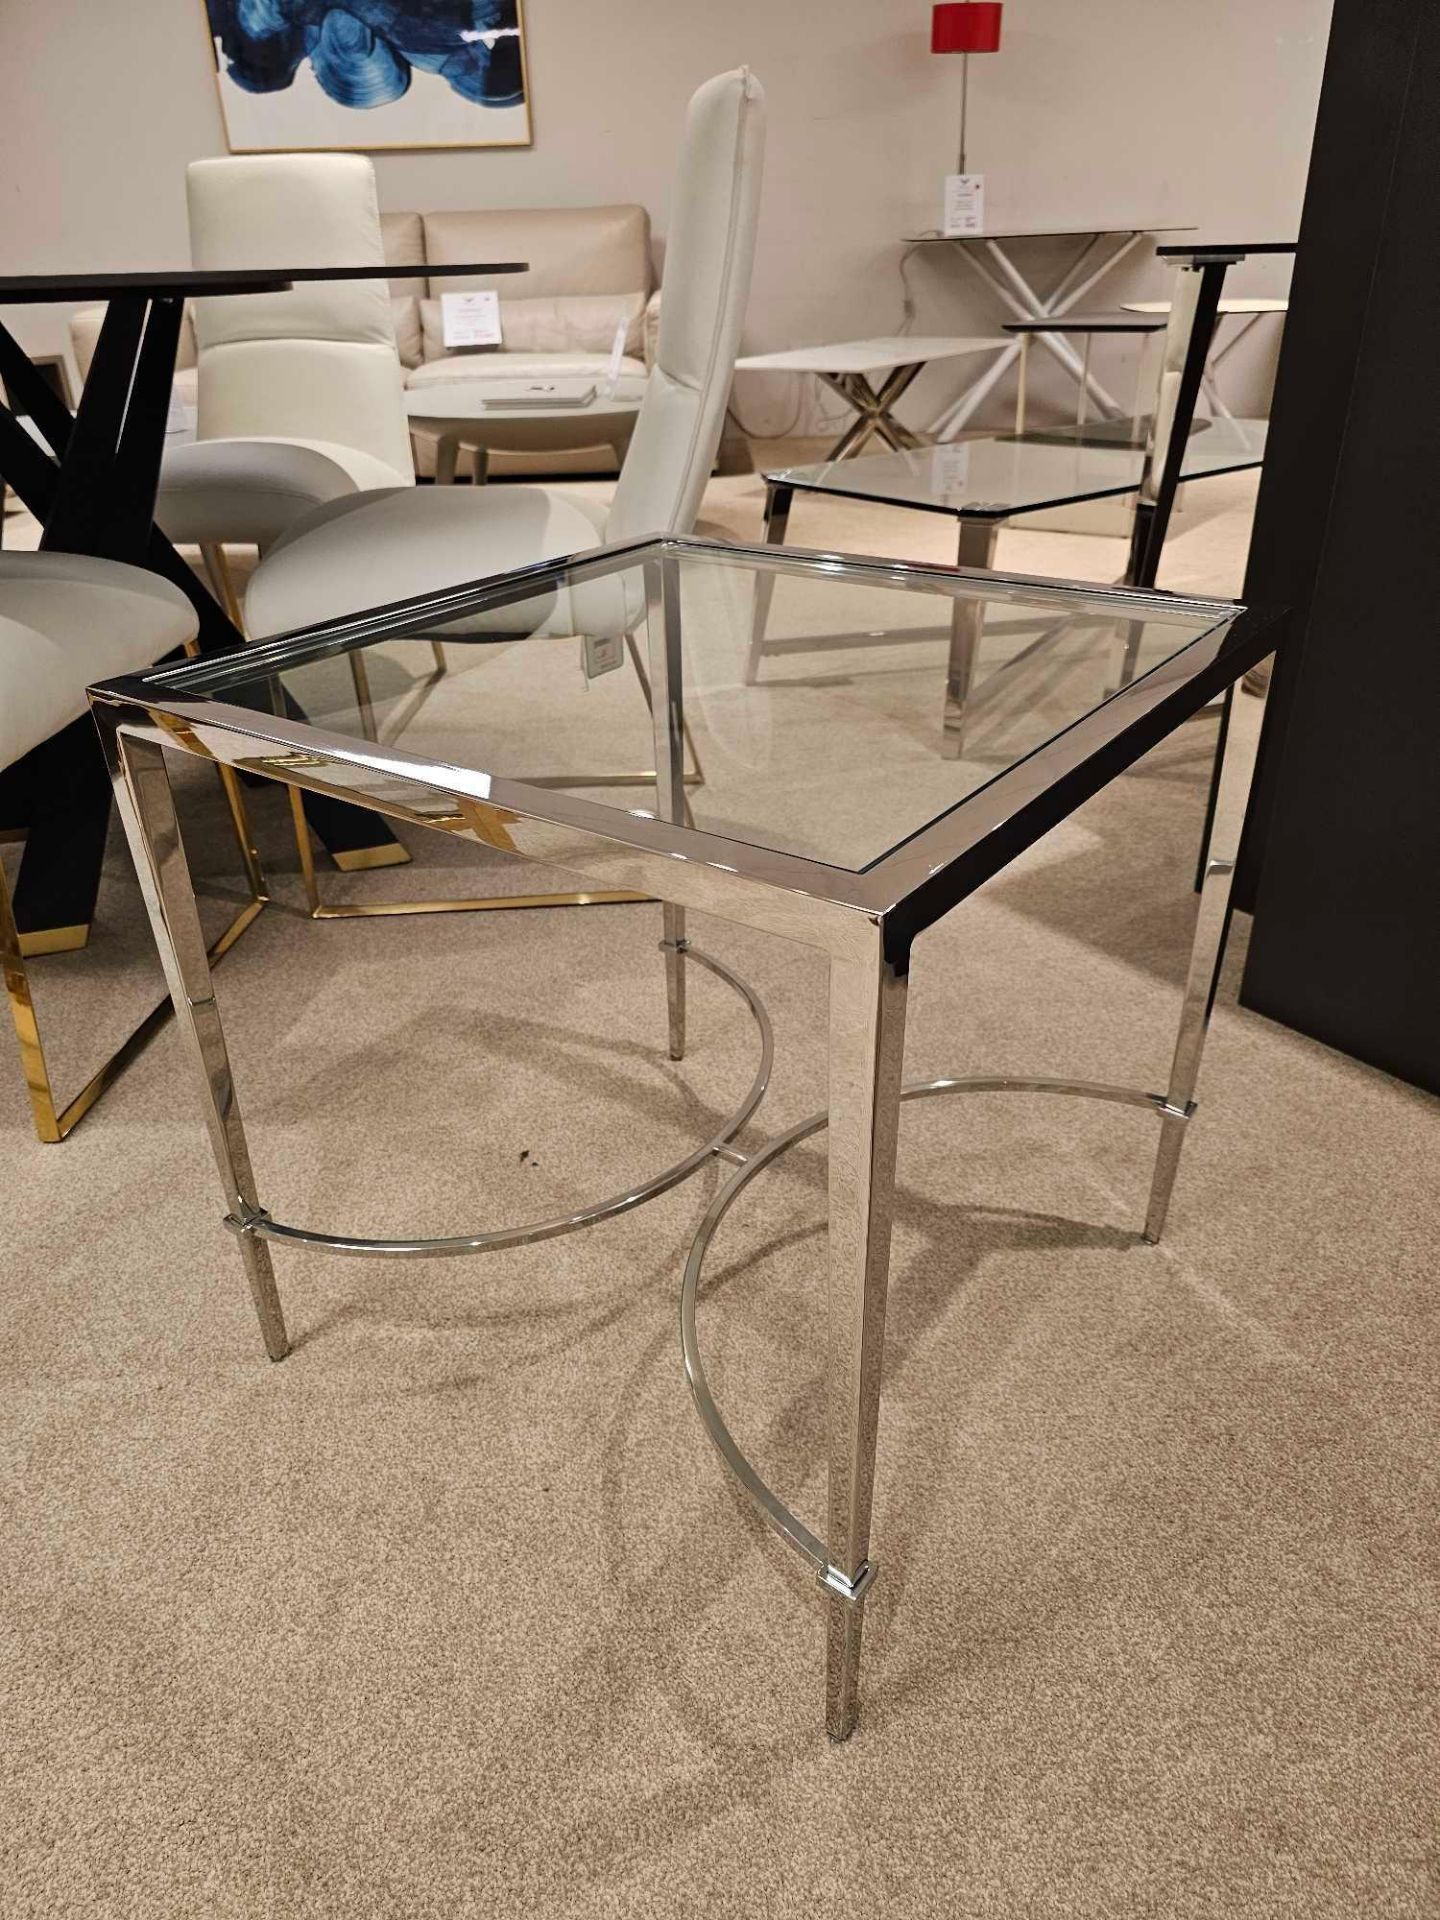 Tokyo Lamp Table by Kesterport The Tokyo lamp table with its clear glass top and a refined tapered - Image 2 of 6